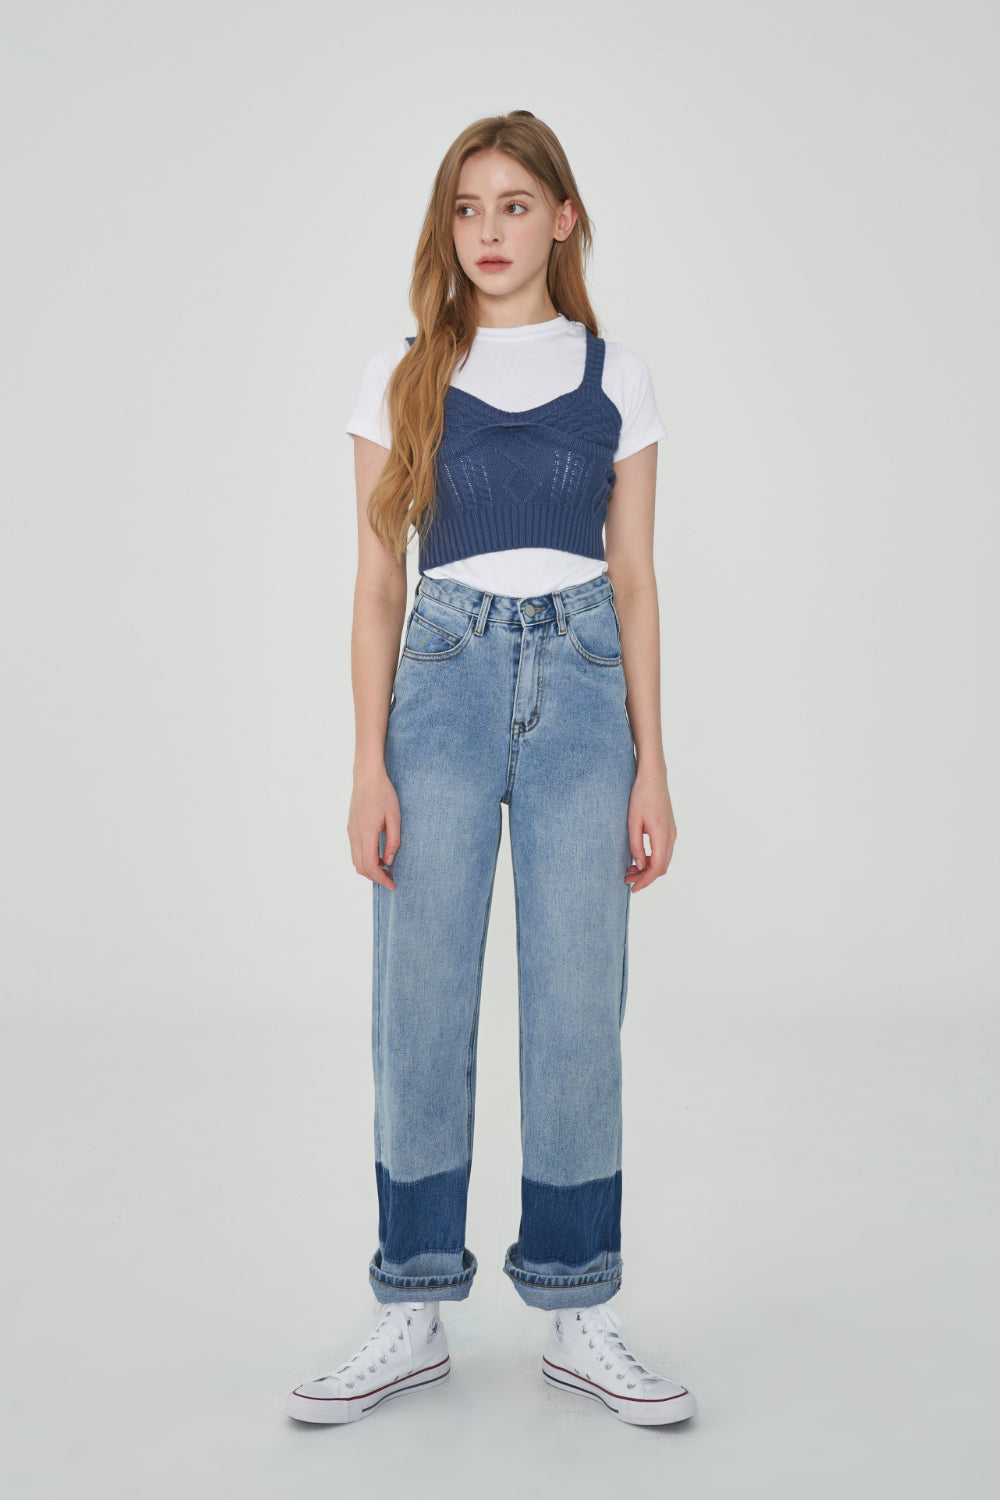 TWO TONE MIXED ROLL UP DENIM PANTS [6605]